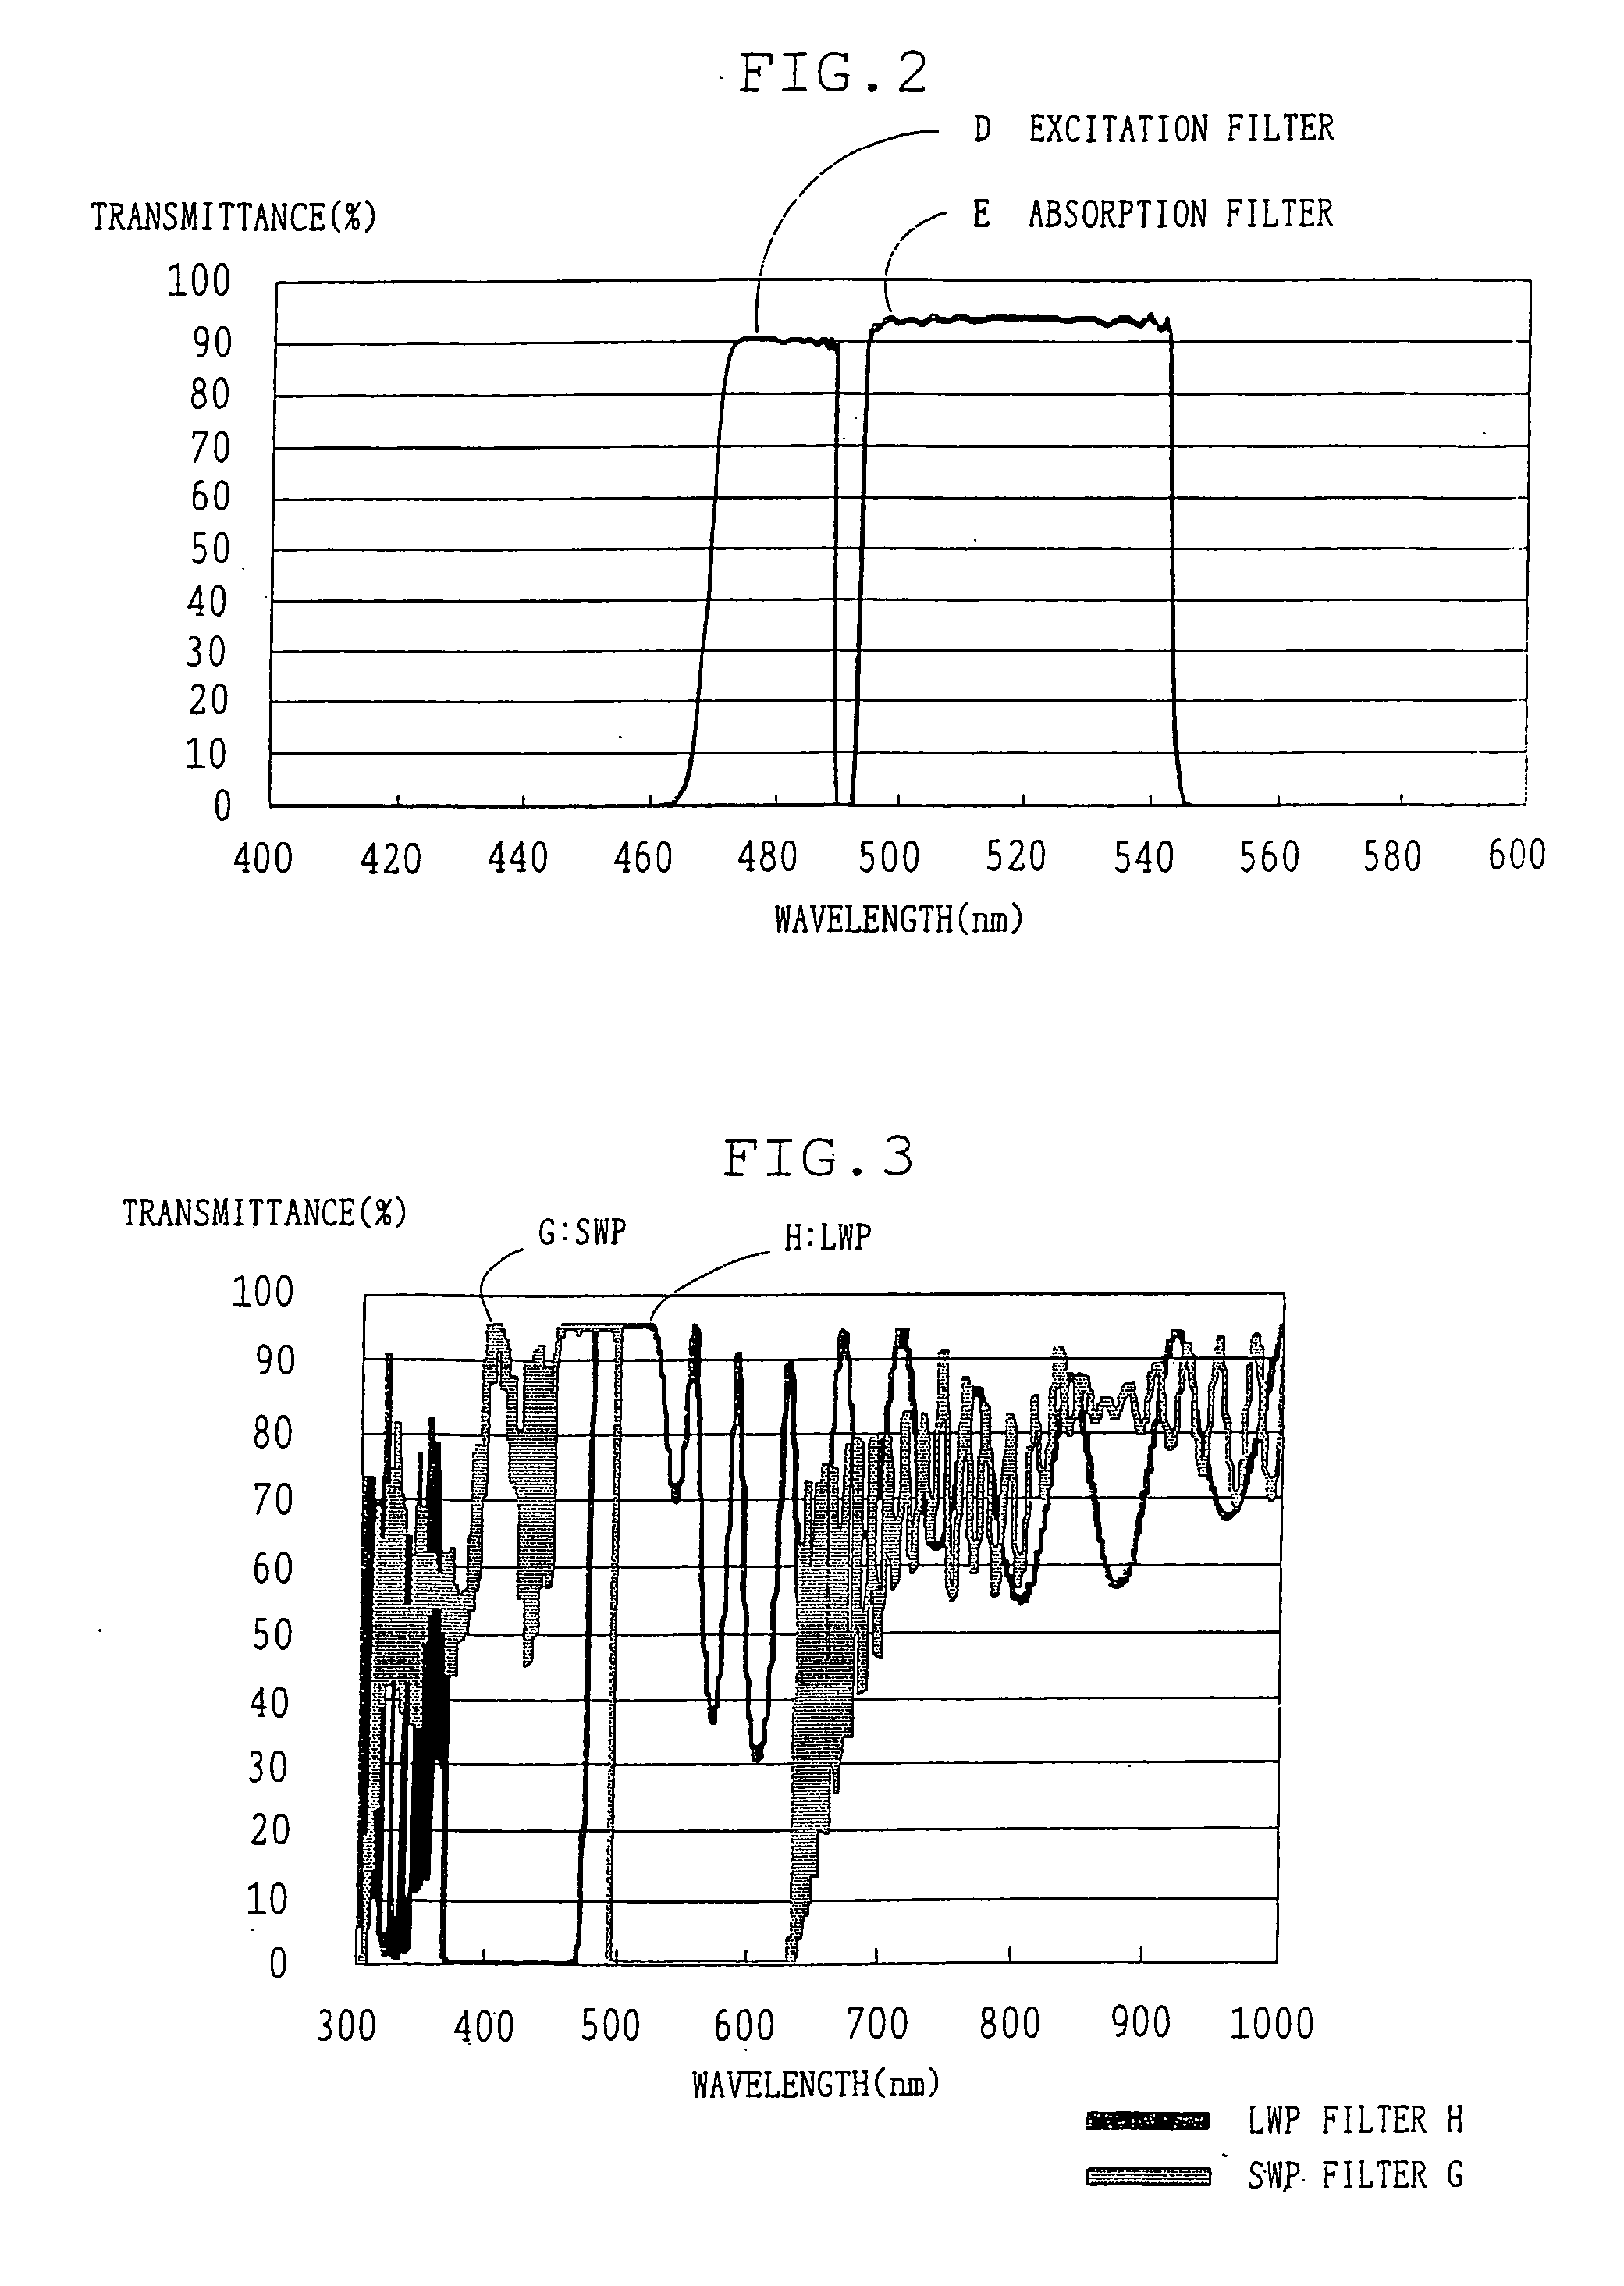 Apparatus for fluorescence observation